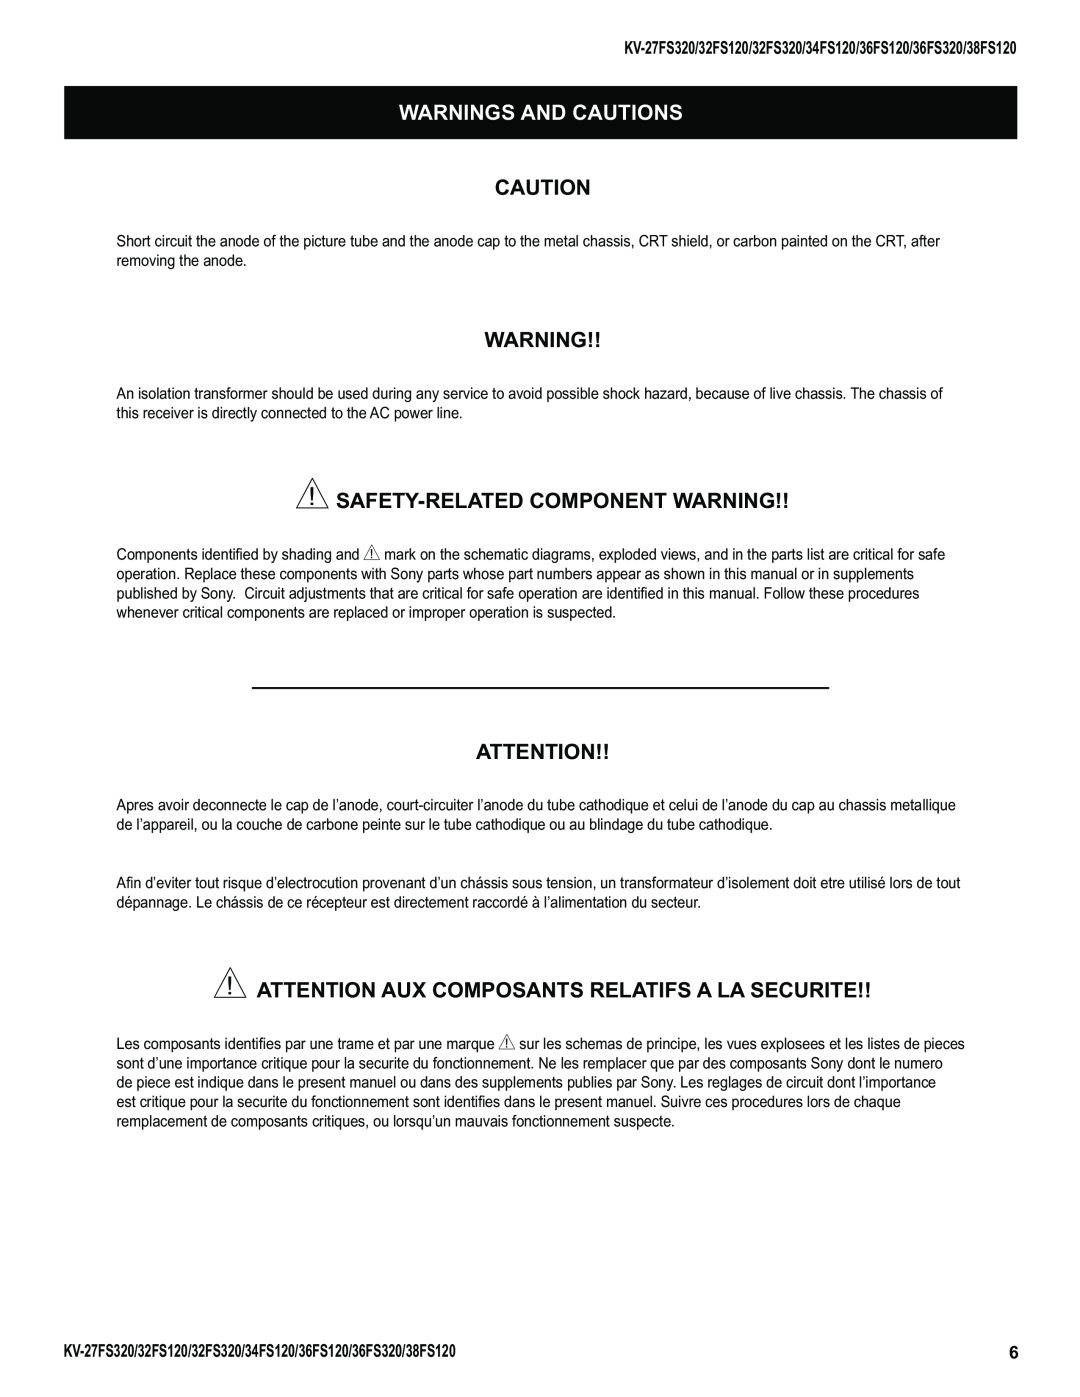 Sony KV-32FS320 Warnings And Cautions, Safety-Related Component Warning, Attention Aux Composants Relatifs A La Securite 